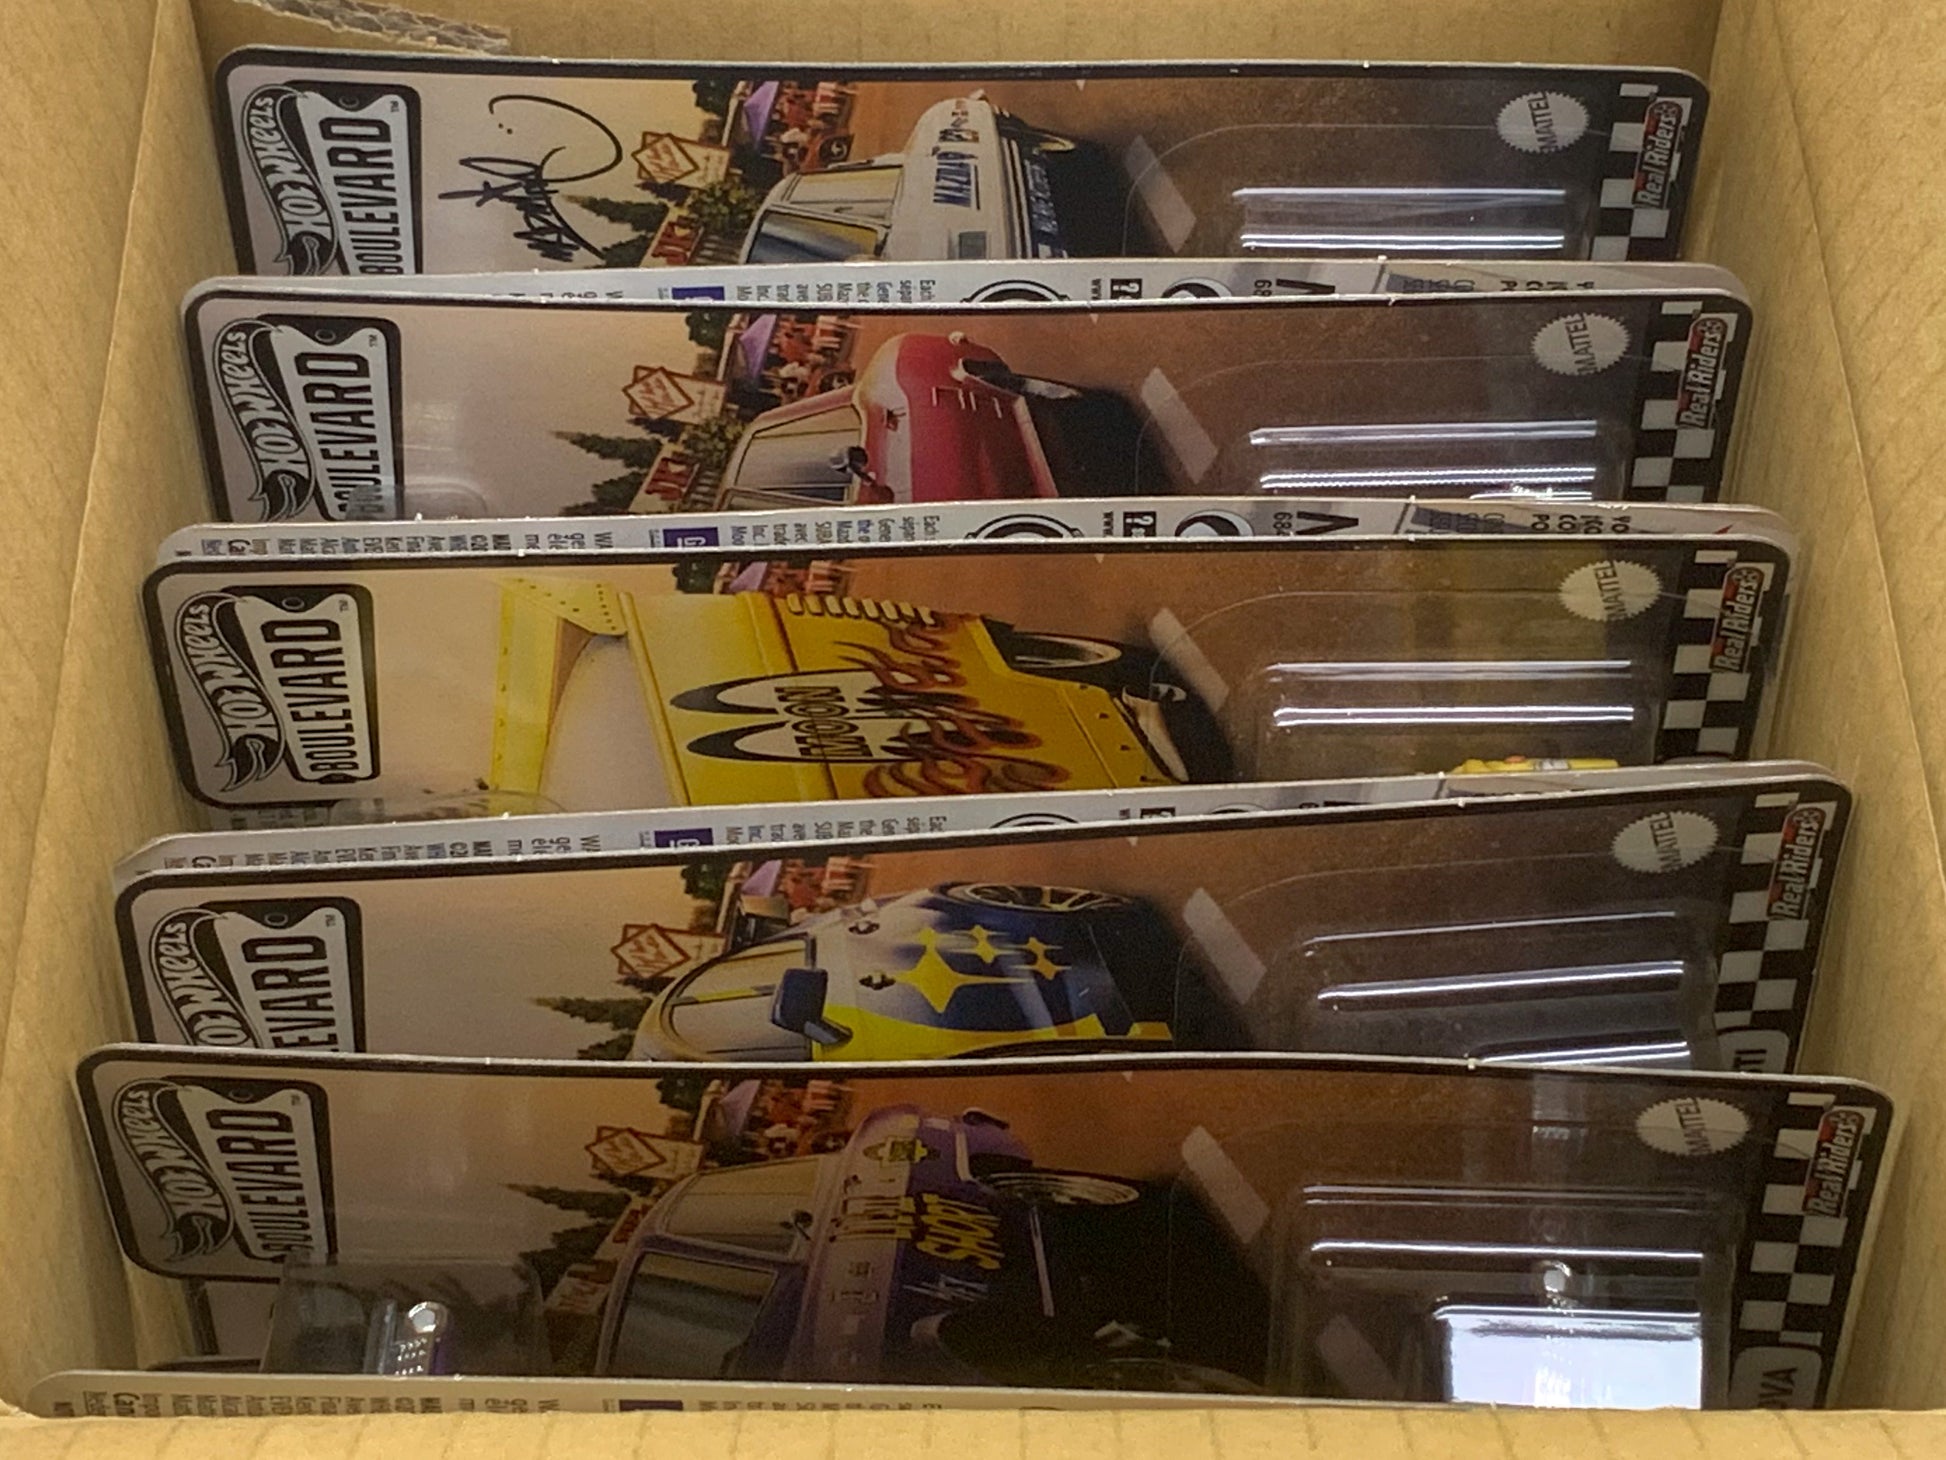 Box of Hot Wheels Boulevard Premium Pieces Number 21, 22, 23, 24, 25 New Collectables Mint Direct From Shippers Brown Box Real Riders Mattel Metal